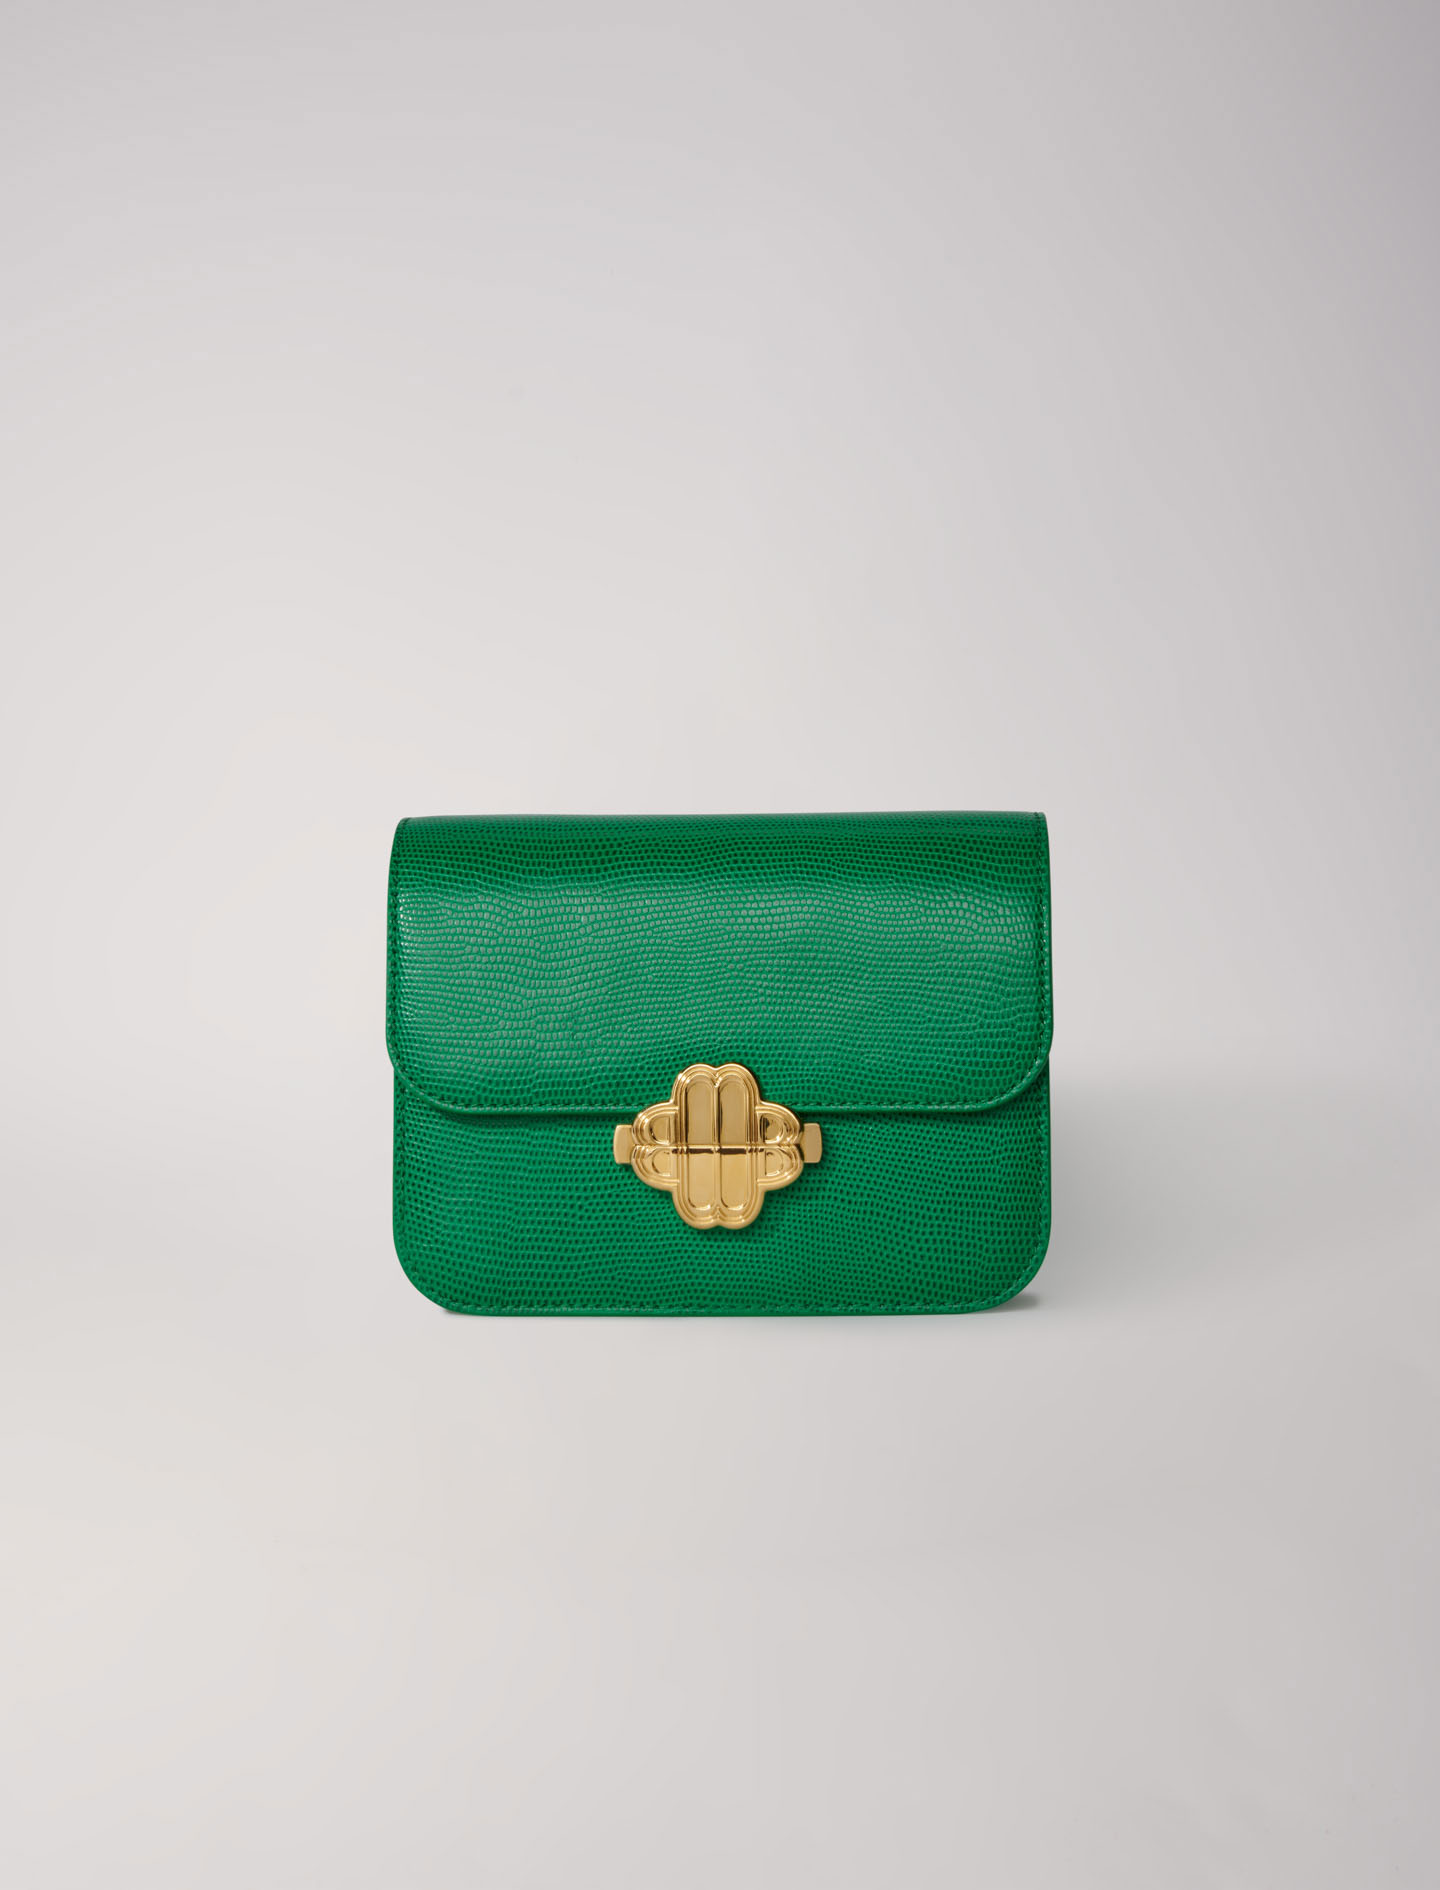 Maje Woman's cotton Coating: Lizard-effect embossed leather bag for Fall/Winter, in color Casino Green /